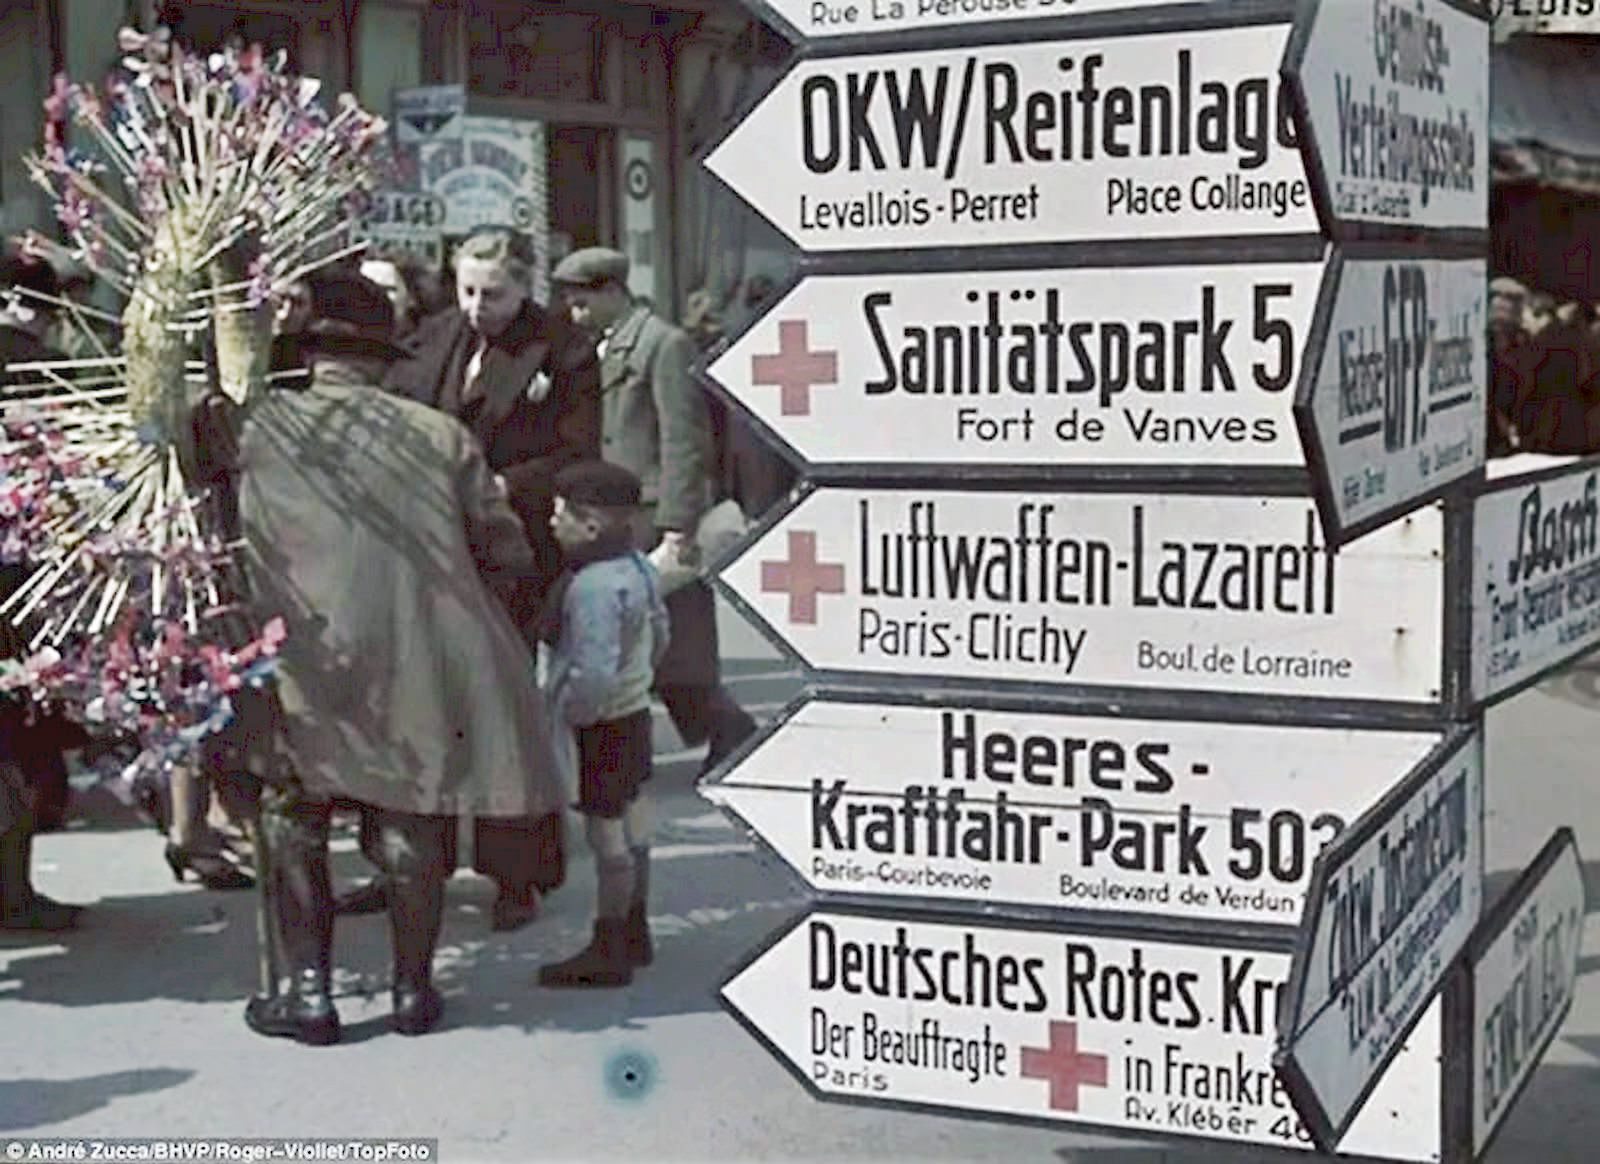 Street signs advertise locations of German facilities in Paris, with their French names written in smaller text beneath.